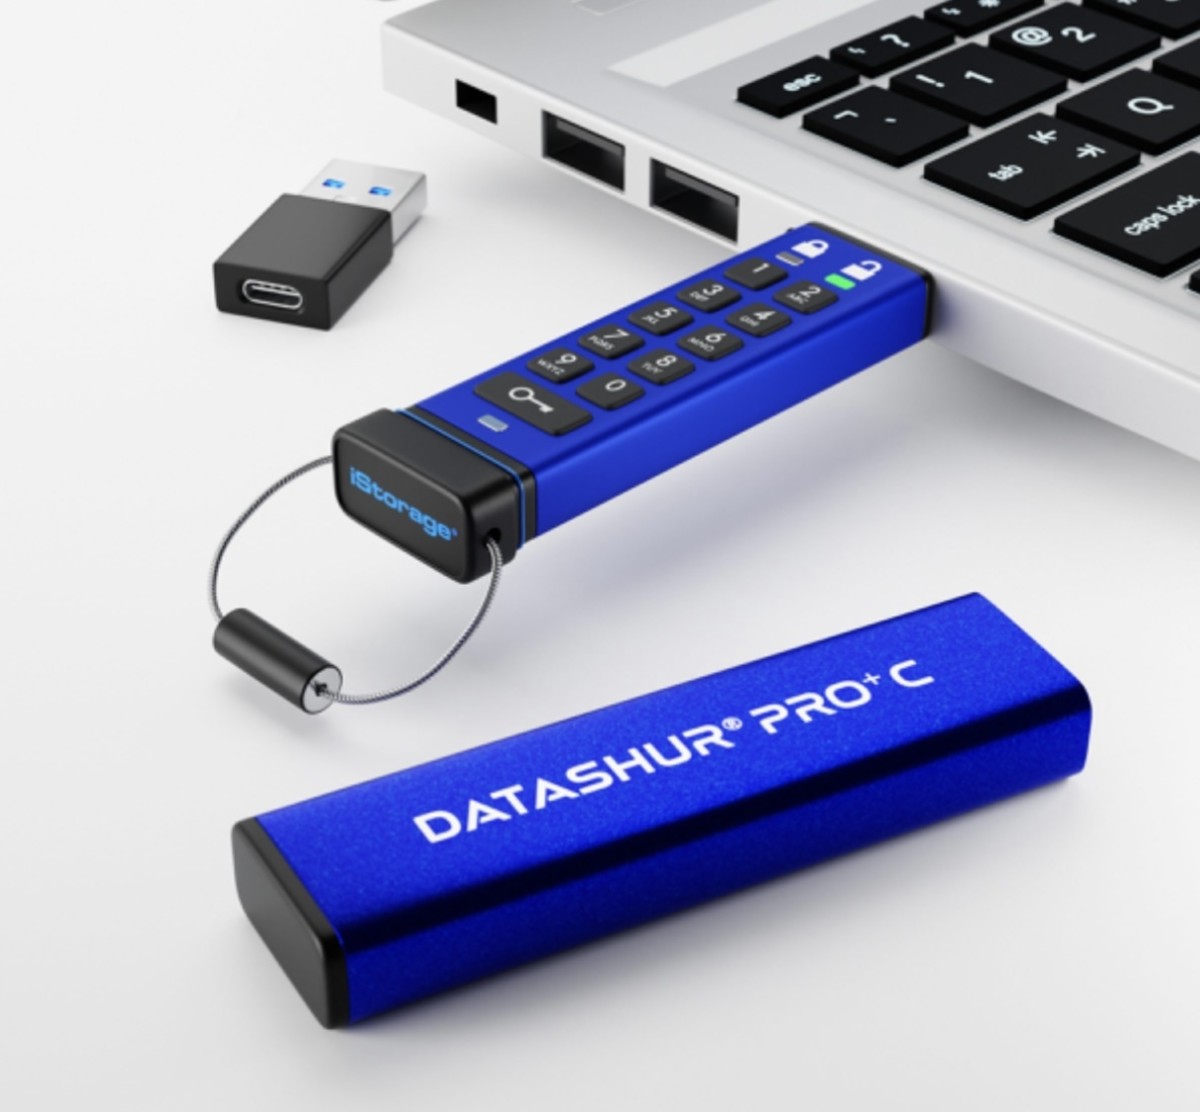 Without The Pin There’s No Way In — The DATASHUR PRO+ C USB Type-C Flash Drive